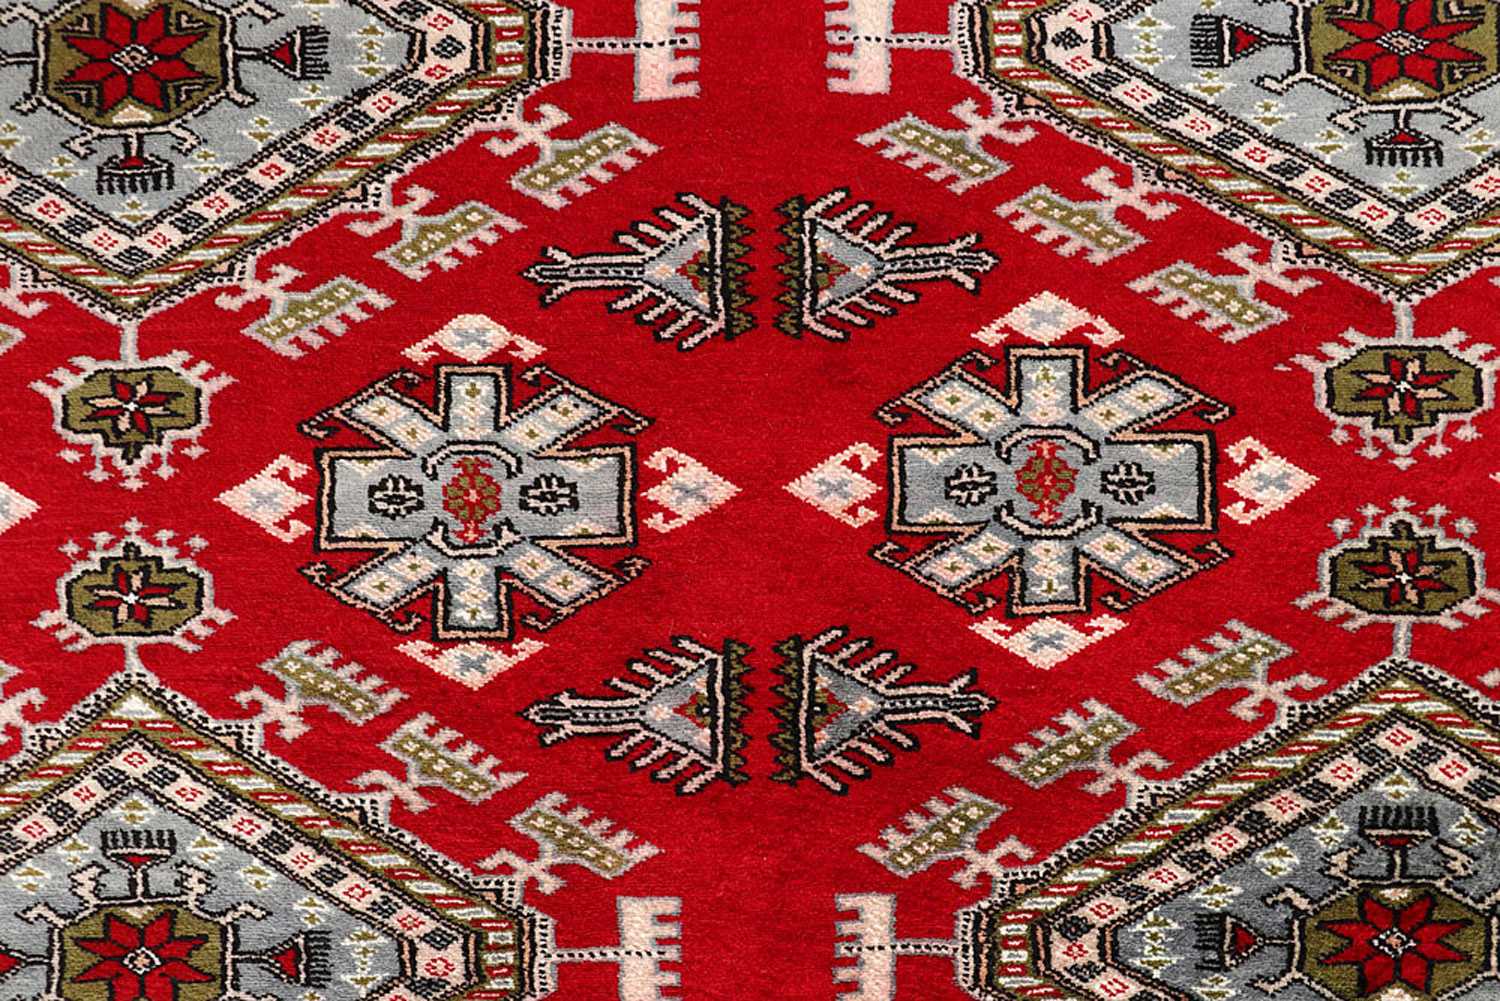 Classical Rugs